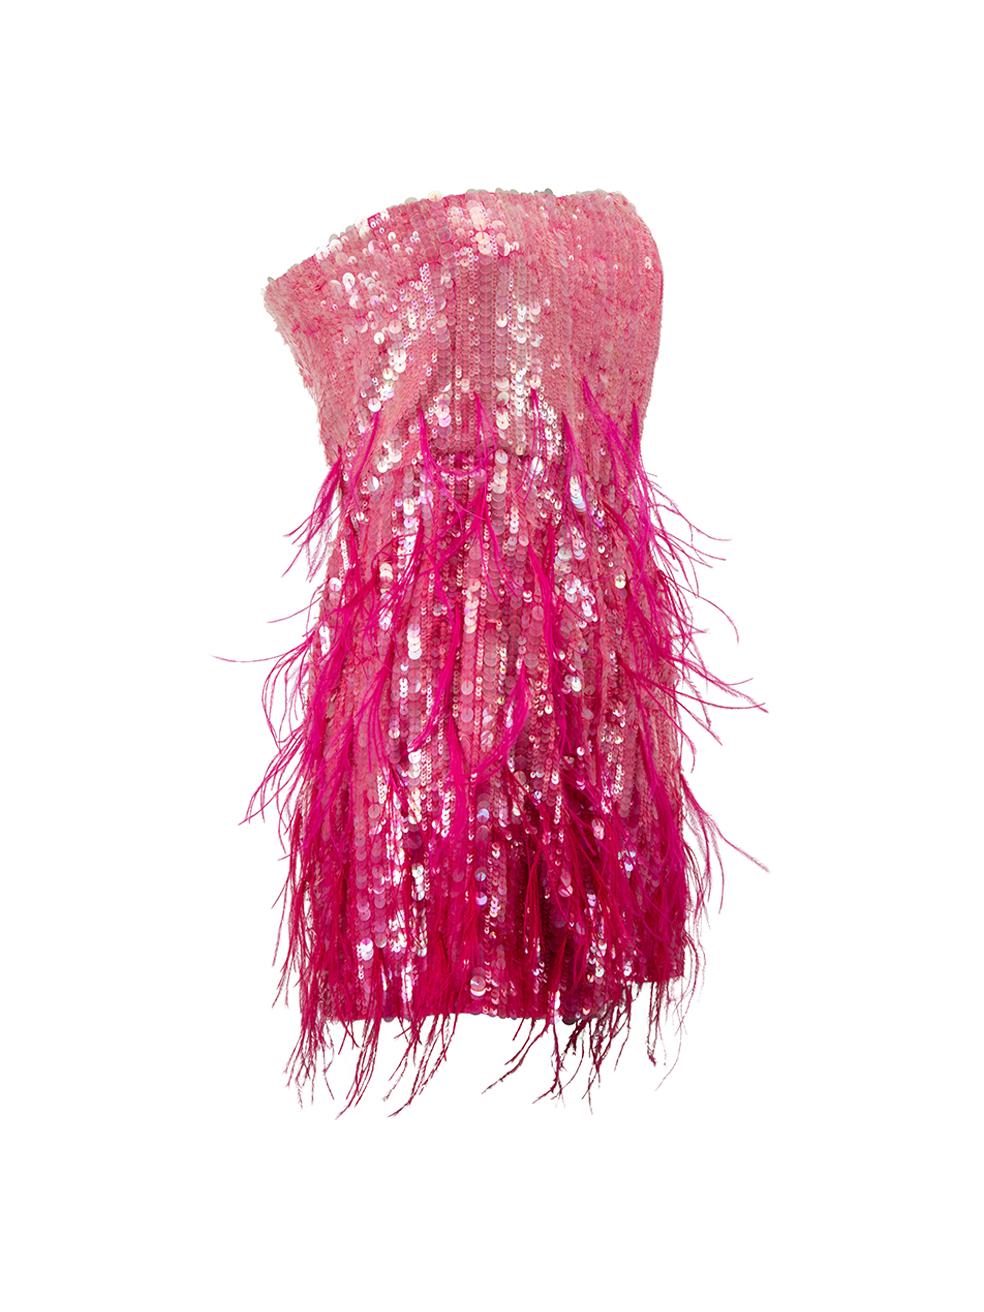 CONDITION is Never worn, with tags. No visible wear to dress is evident on this new Retrofête designer resale item.
 
Details
Pink
Polyester
Mini dress
Sequinned and faux feather accent
Strapless
 
Made in India
 
Composition
100% Polyester
 
Care